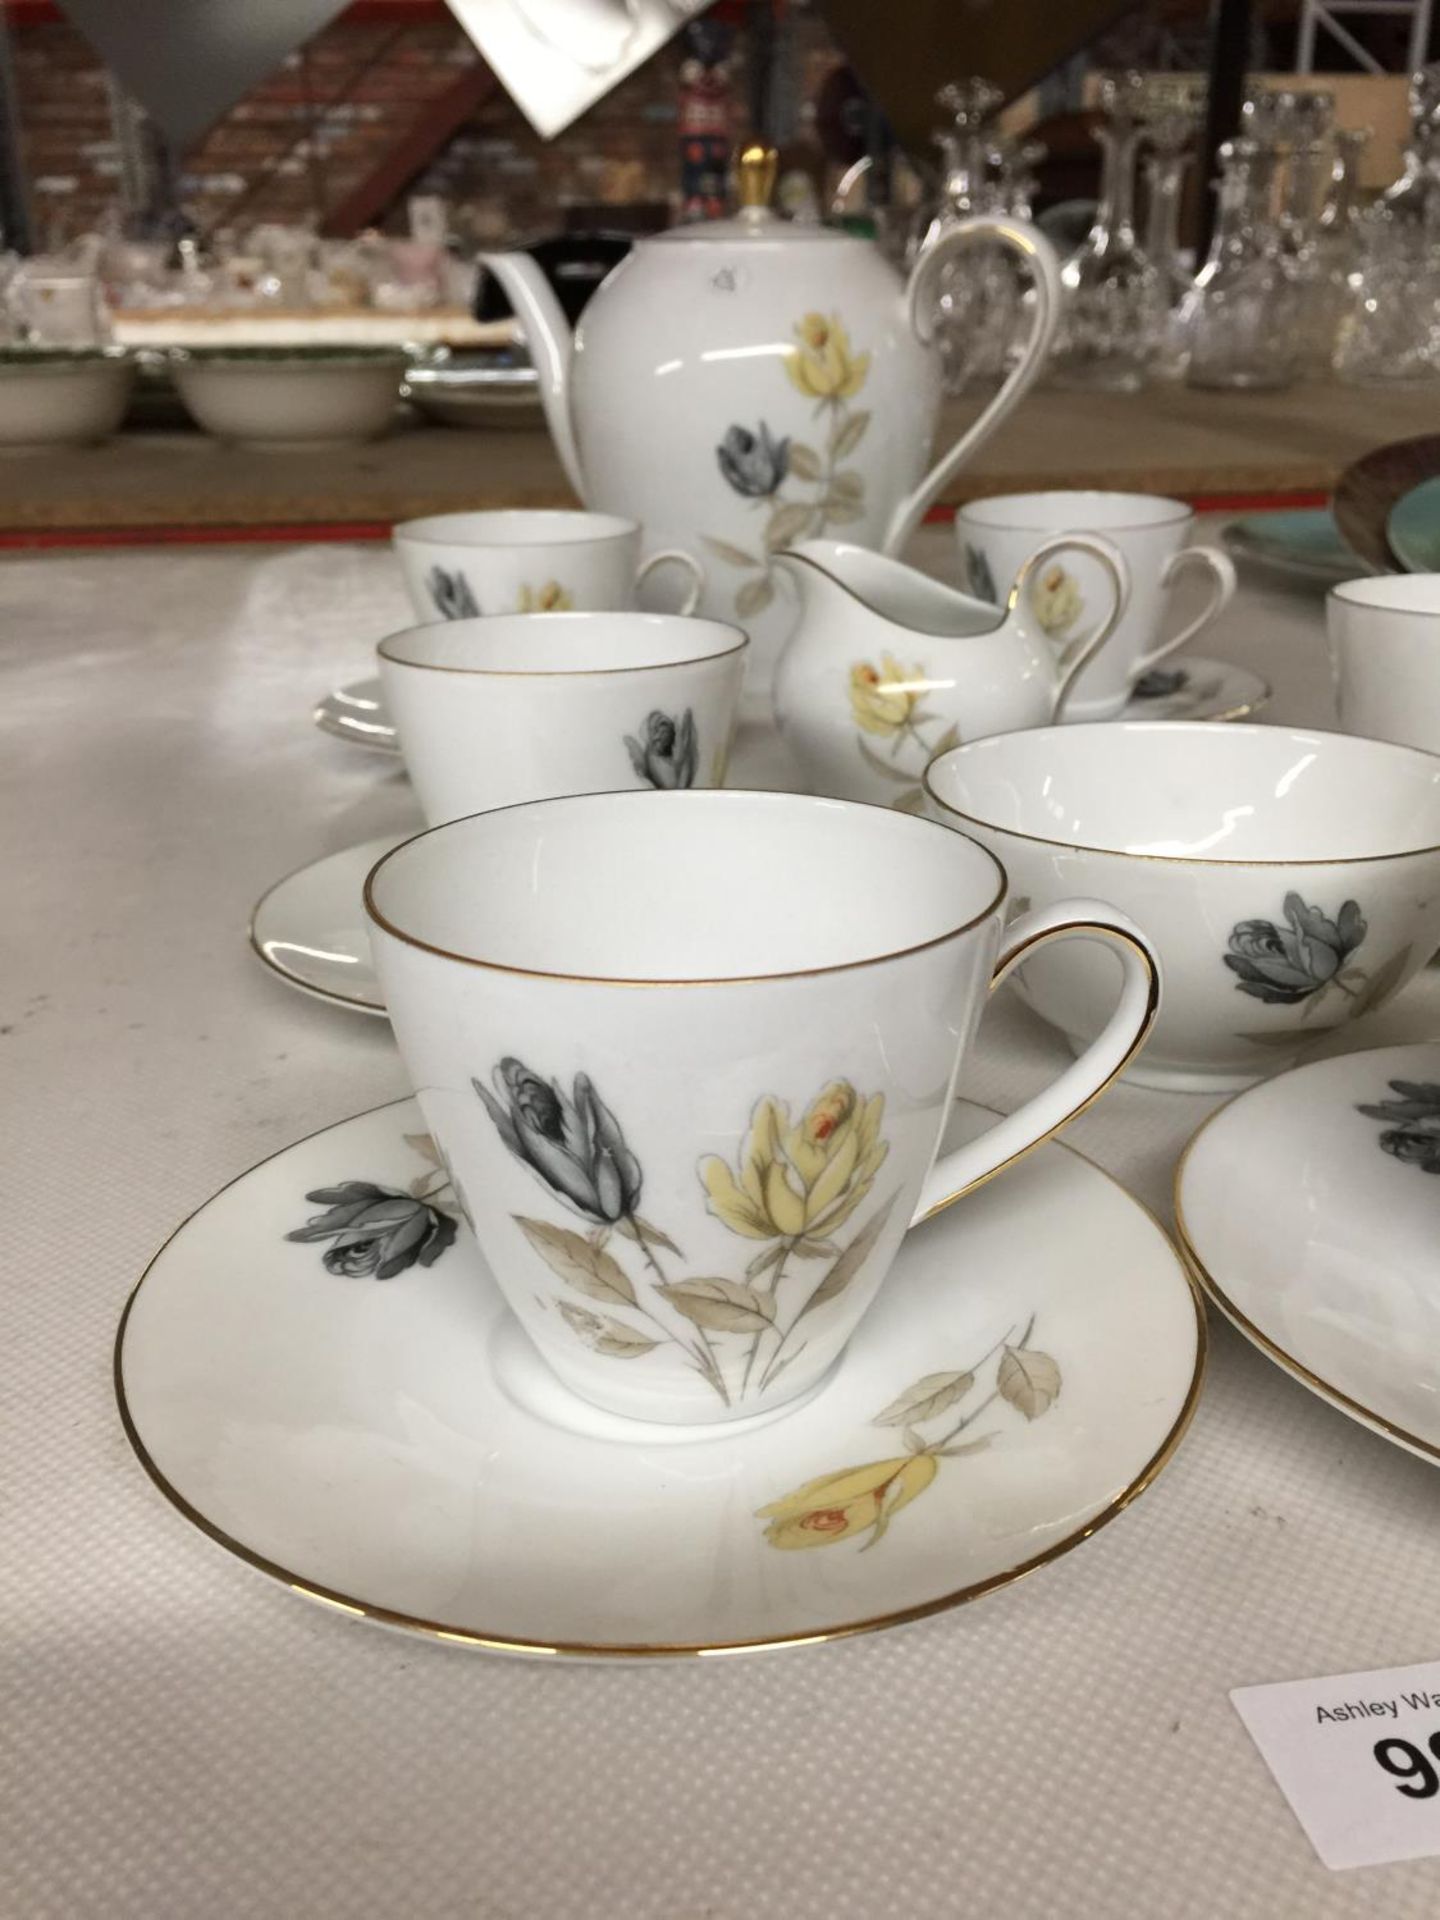 A BAVARIAN GERMANY CHINA TEASET WITH FLOWER PATTERN COMPRISING OF CUPS AND SAUCERS, TEAPOT, CREAM - Image 2 of 3